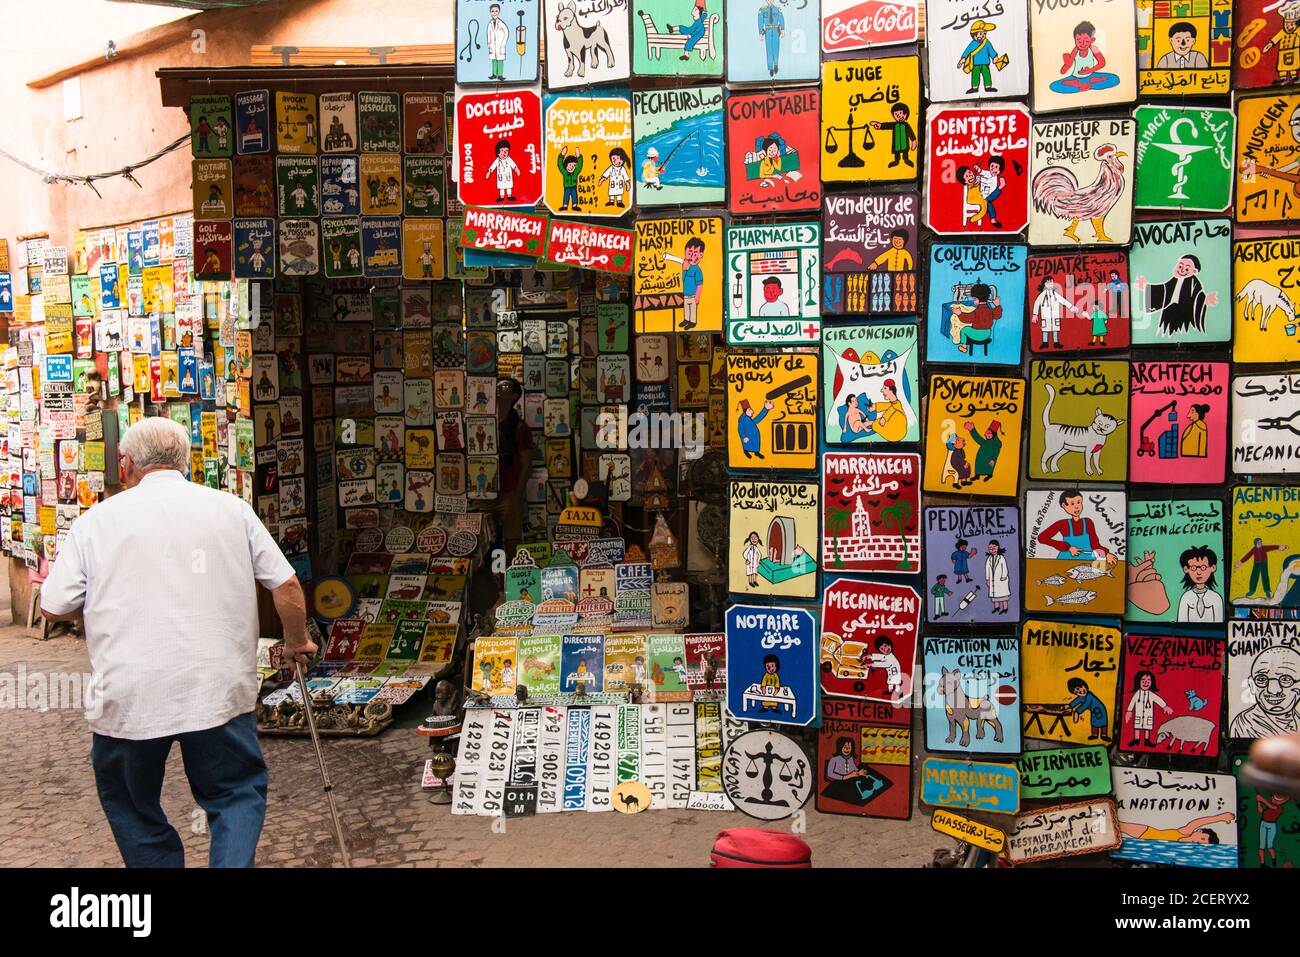 Man with walking stick walks past a stall selling hand painted signs in the souk within the Medina, Marrakesh Stock Photo